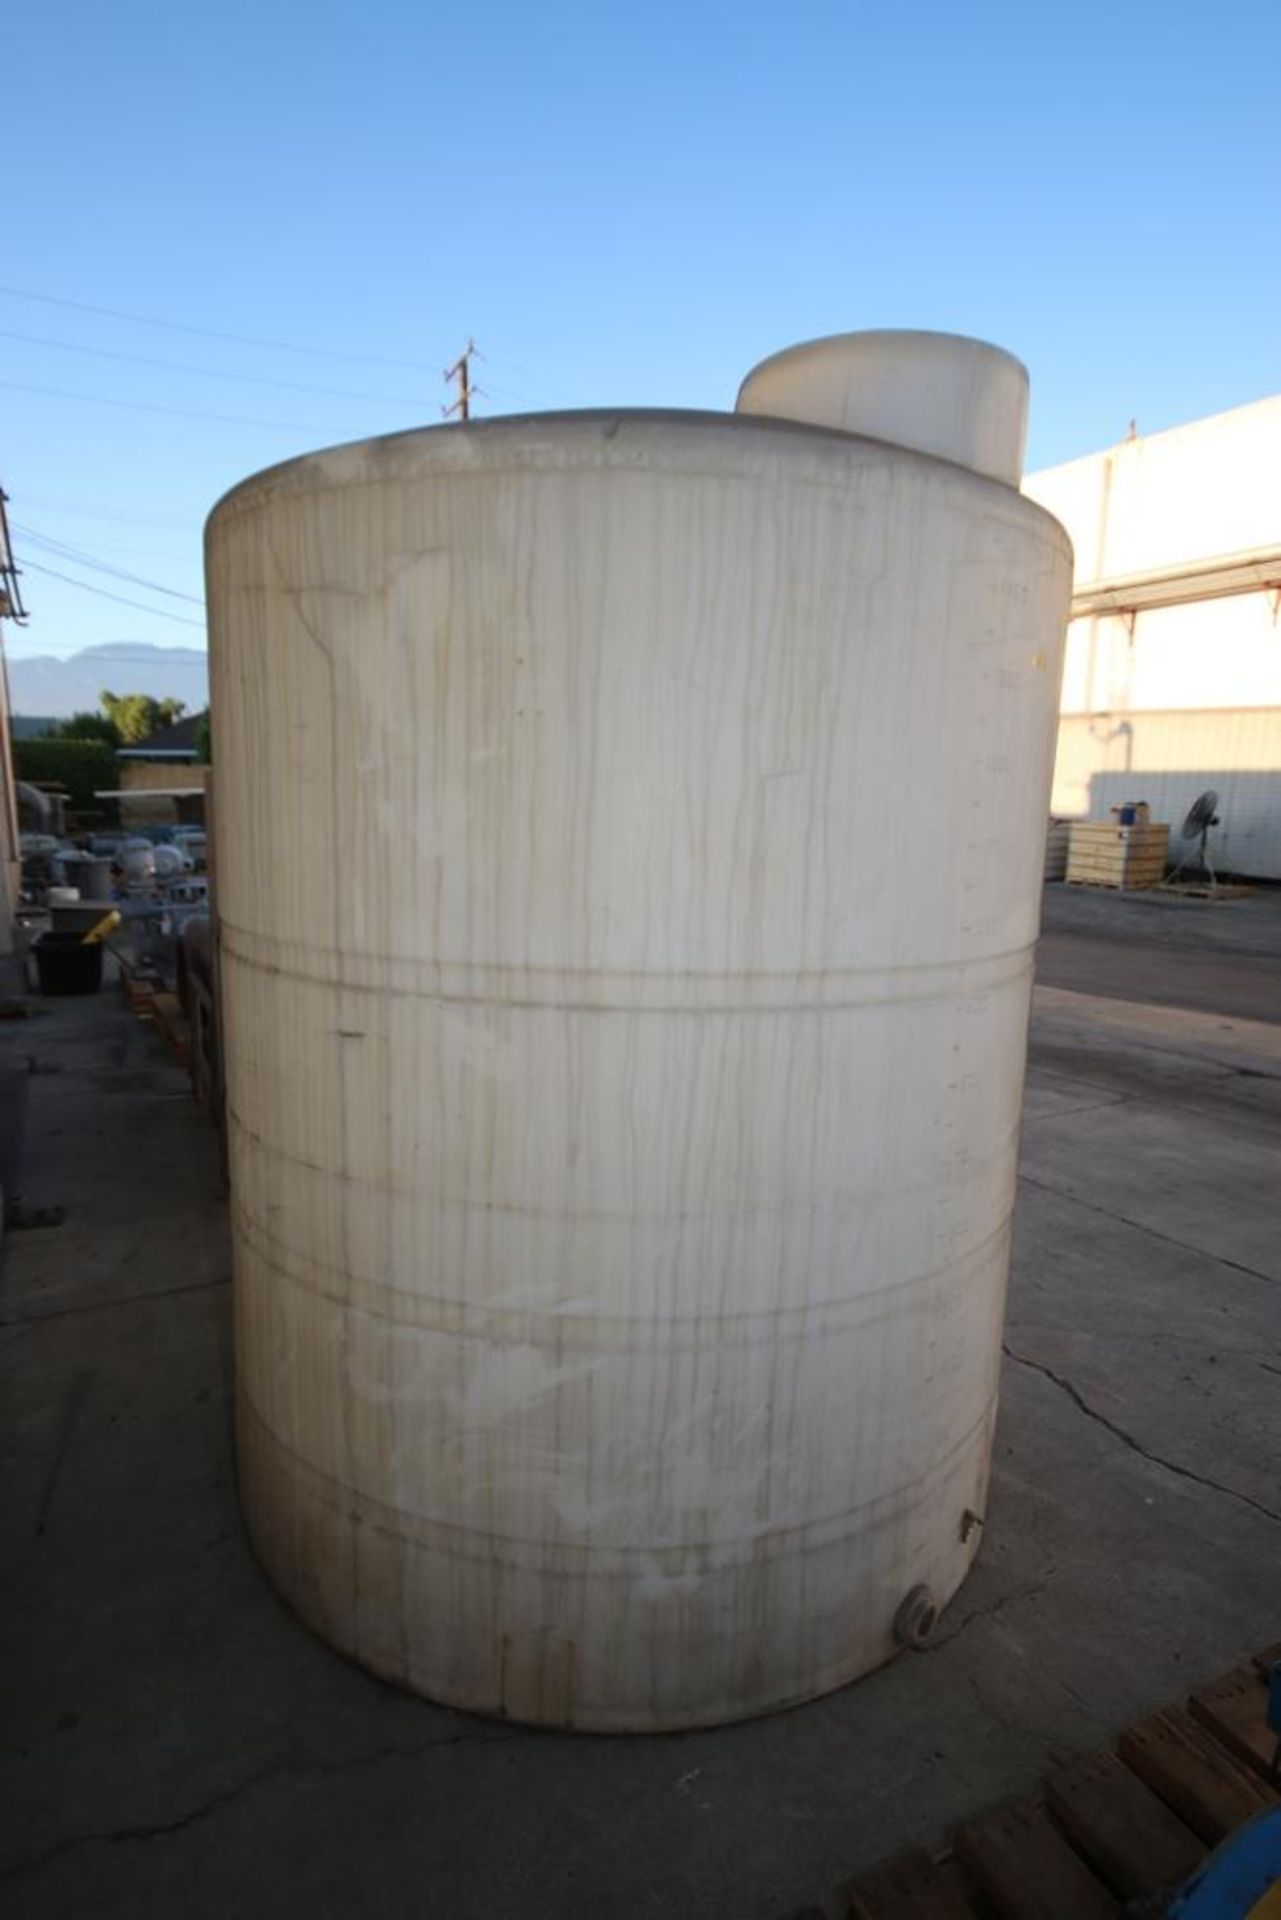 1,400 Gal. Vertical Plastic Storage Tank, Overall Dims.: Aprox. 83" Tall x 69" Dia. - Image 2 of 2